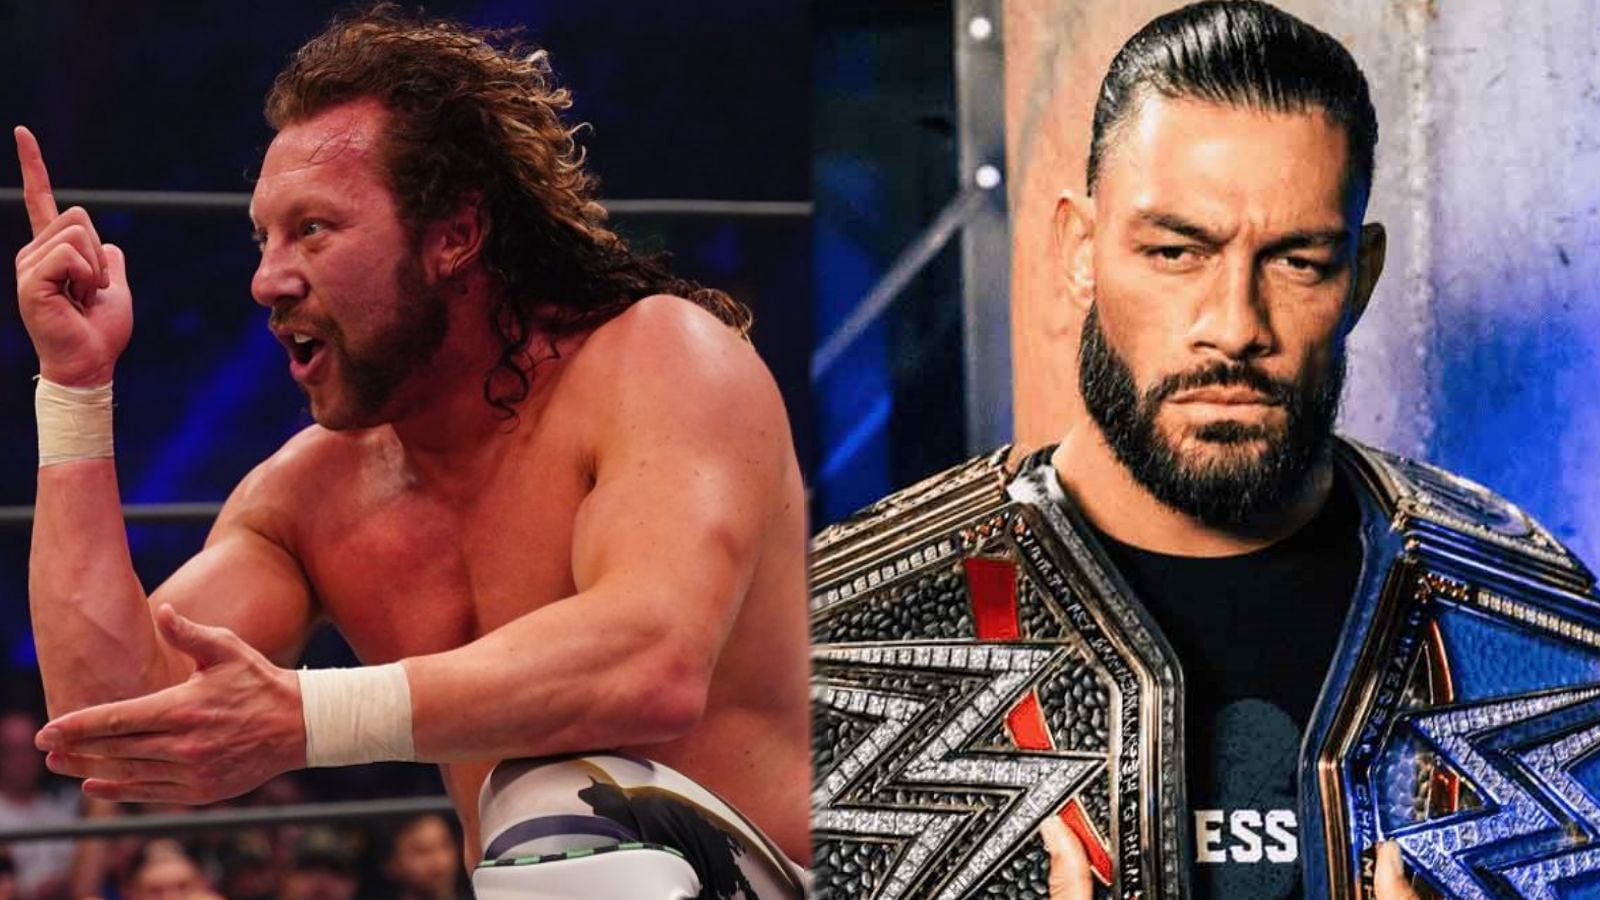 How have Kenny Omega and Roman Reigns been involved with All Elite Wrestling this week?